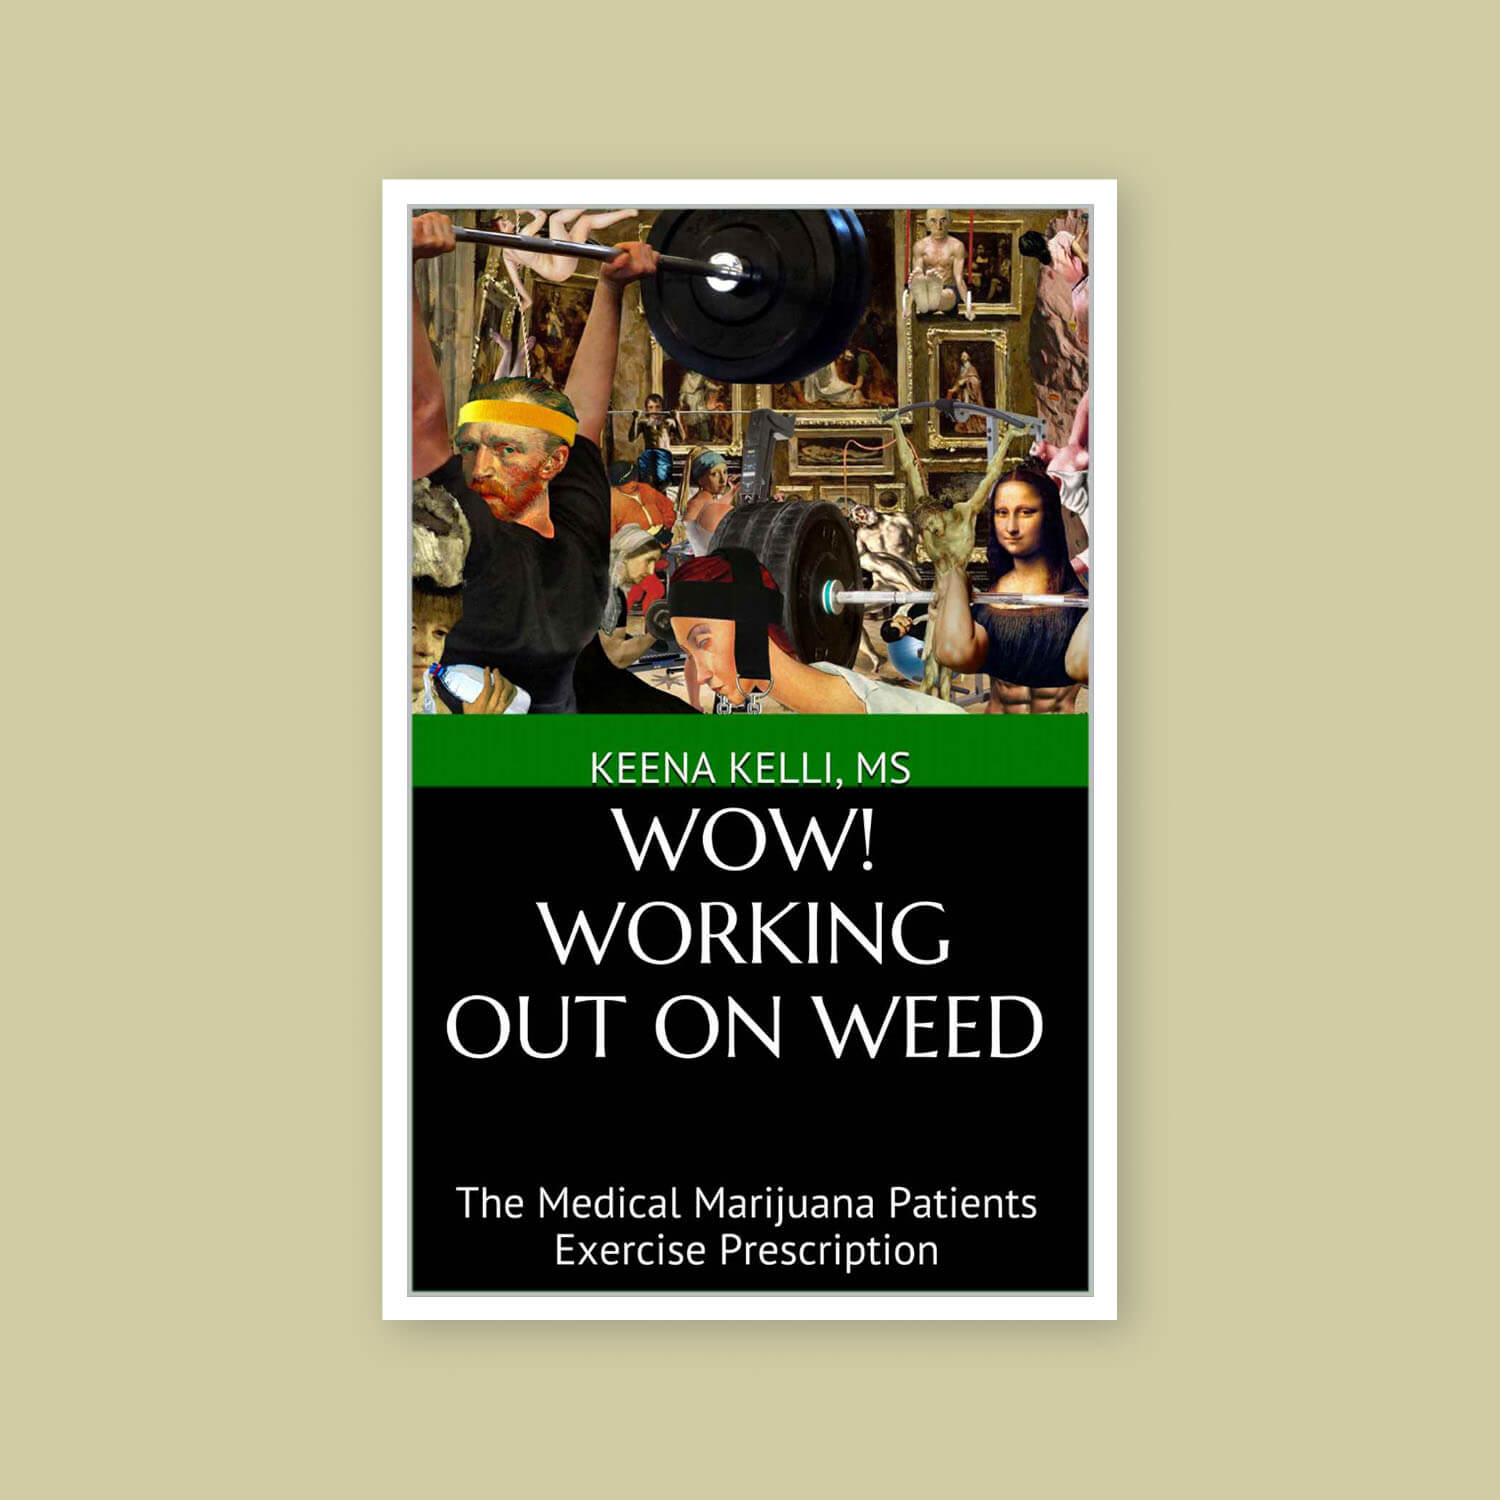 Wow! Working out on weed | Goldleaf